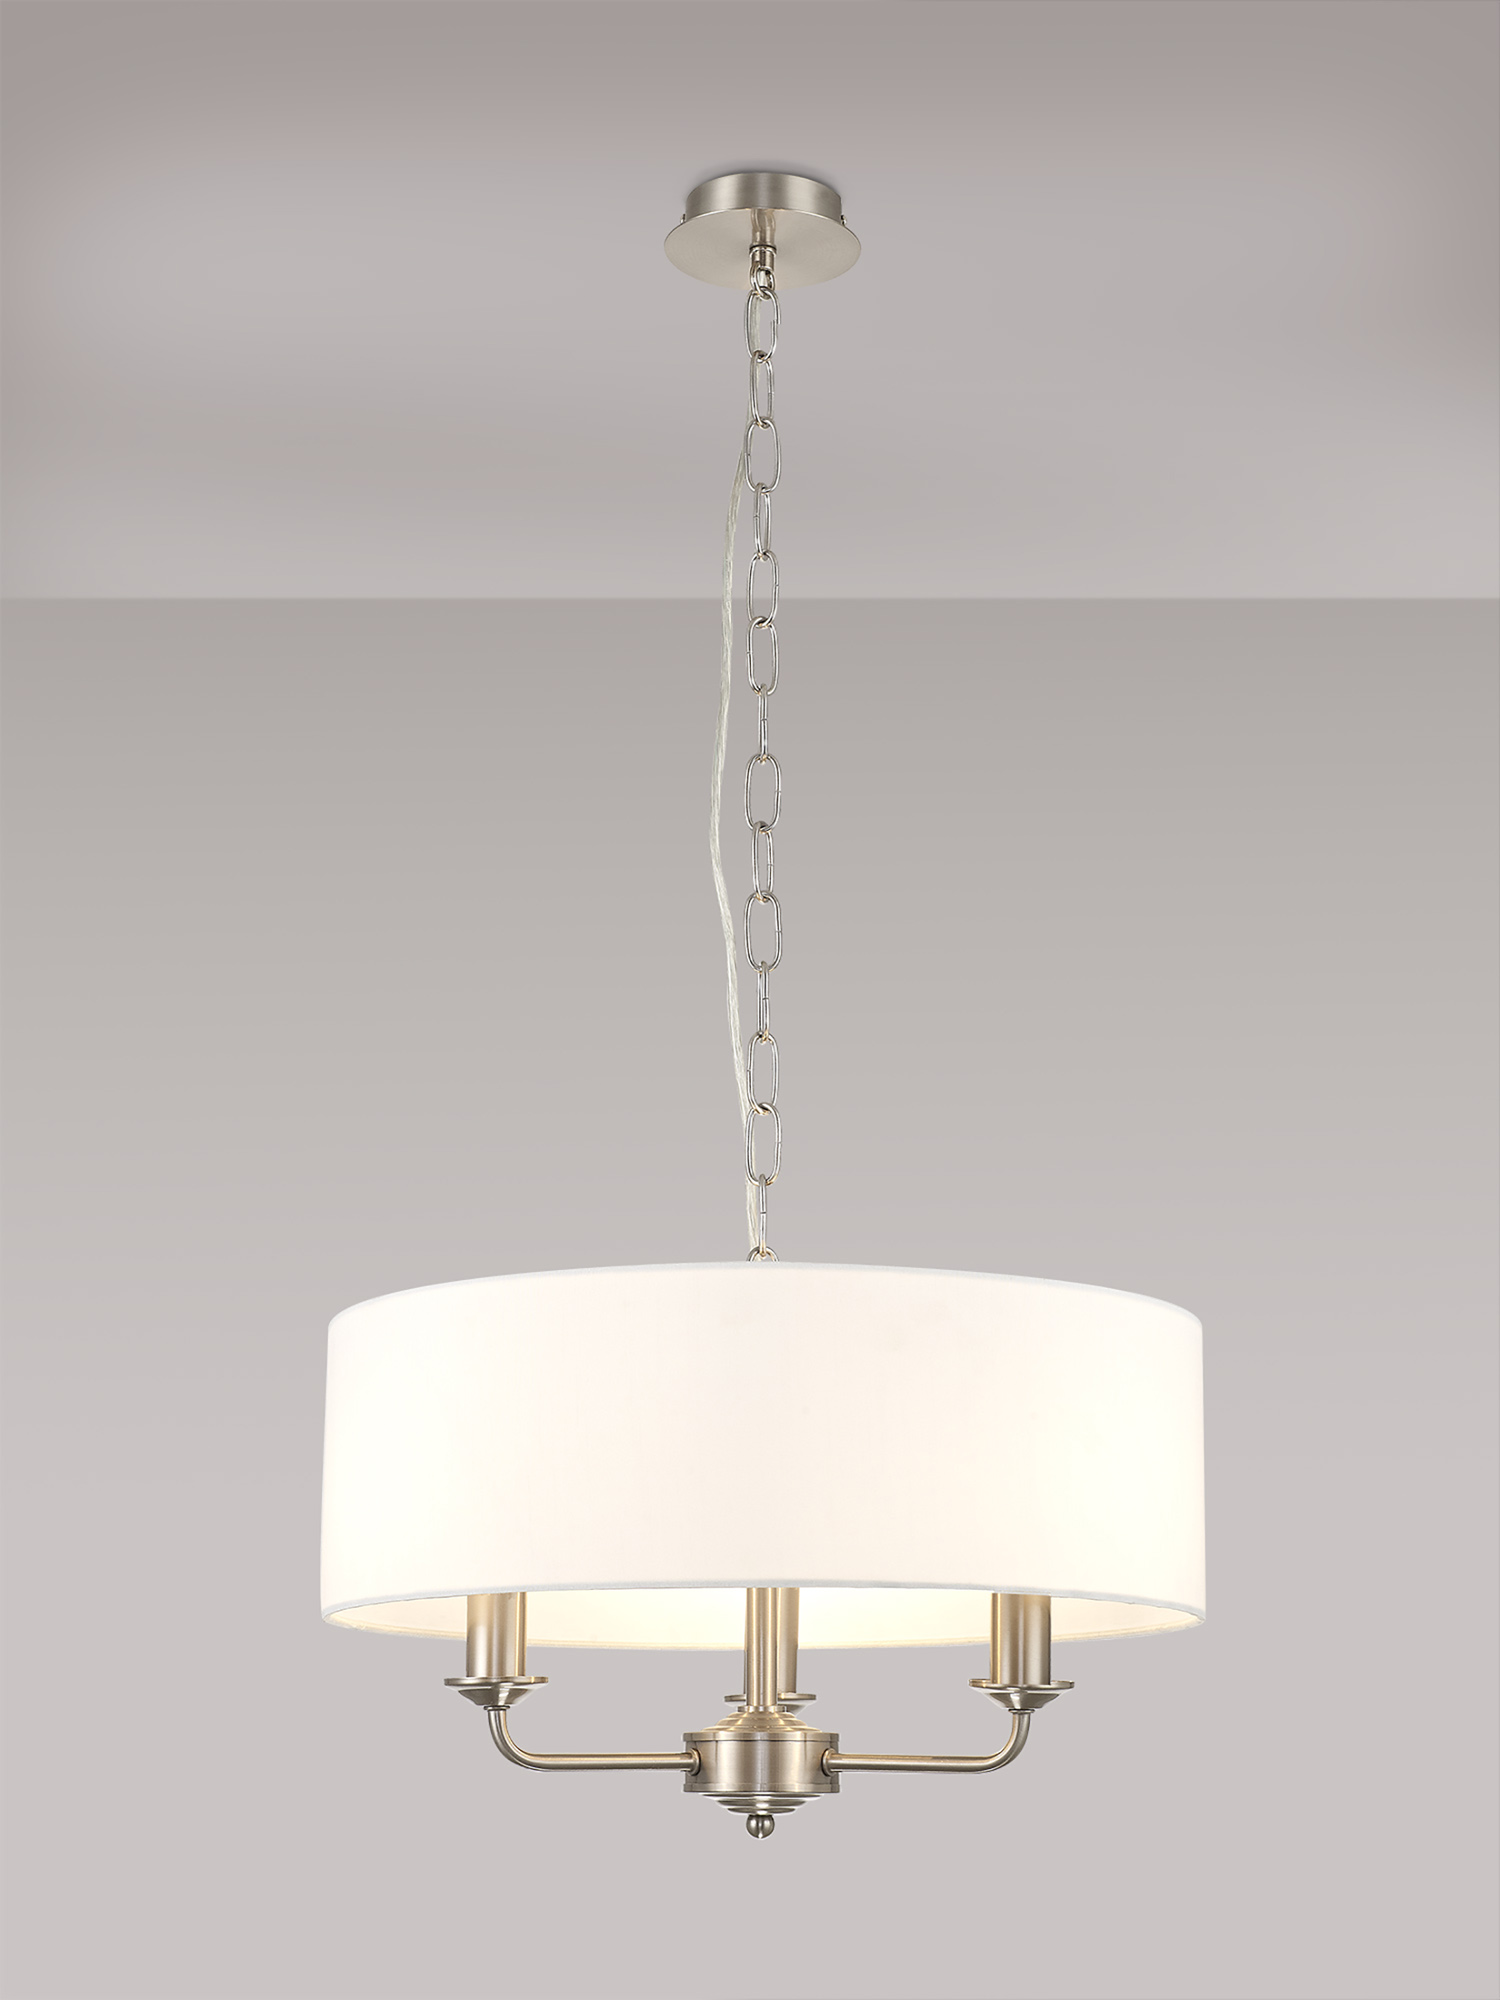 Banyan SN WH Ceiling Lights Deco Multi Arm Fittings